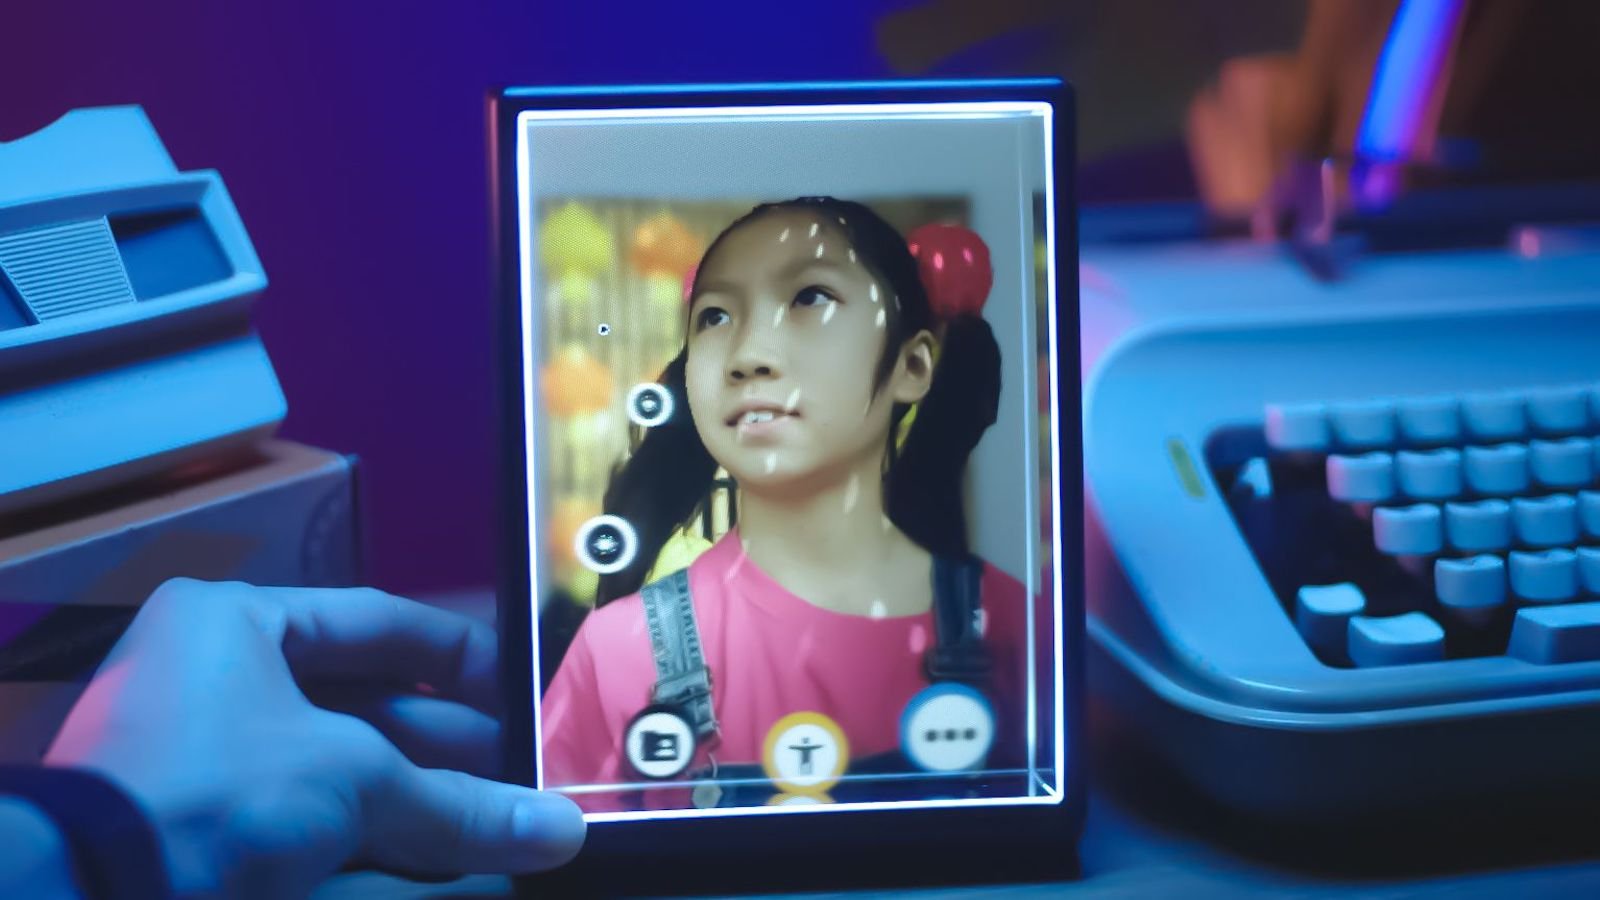 Looking Glass Portrait personal holographic display portrays videos and images in 3D